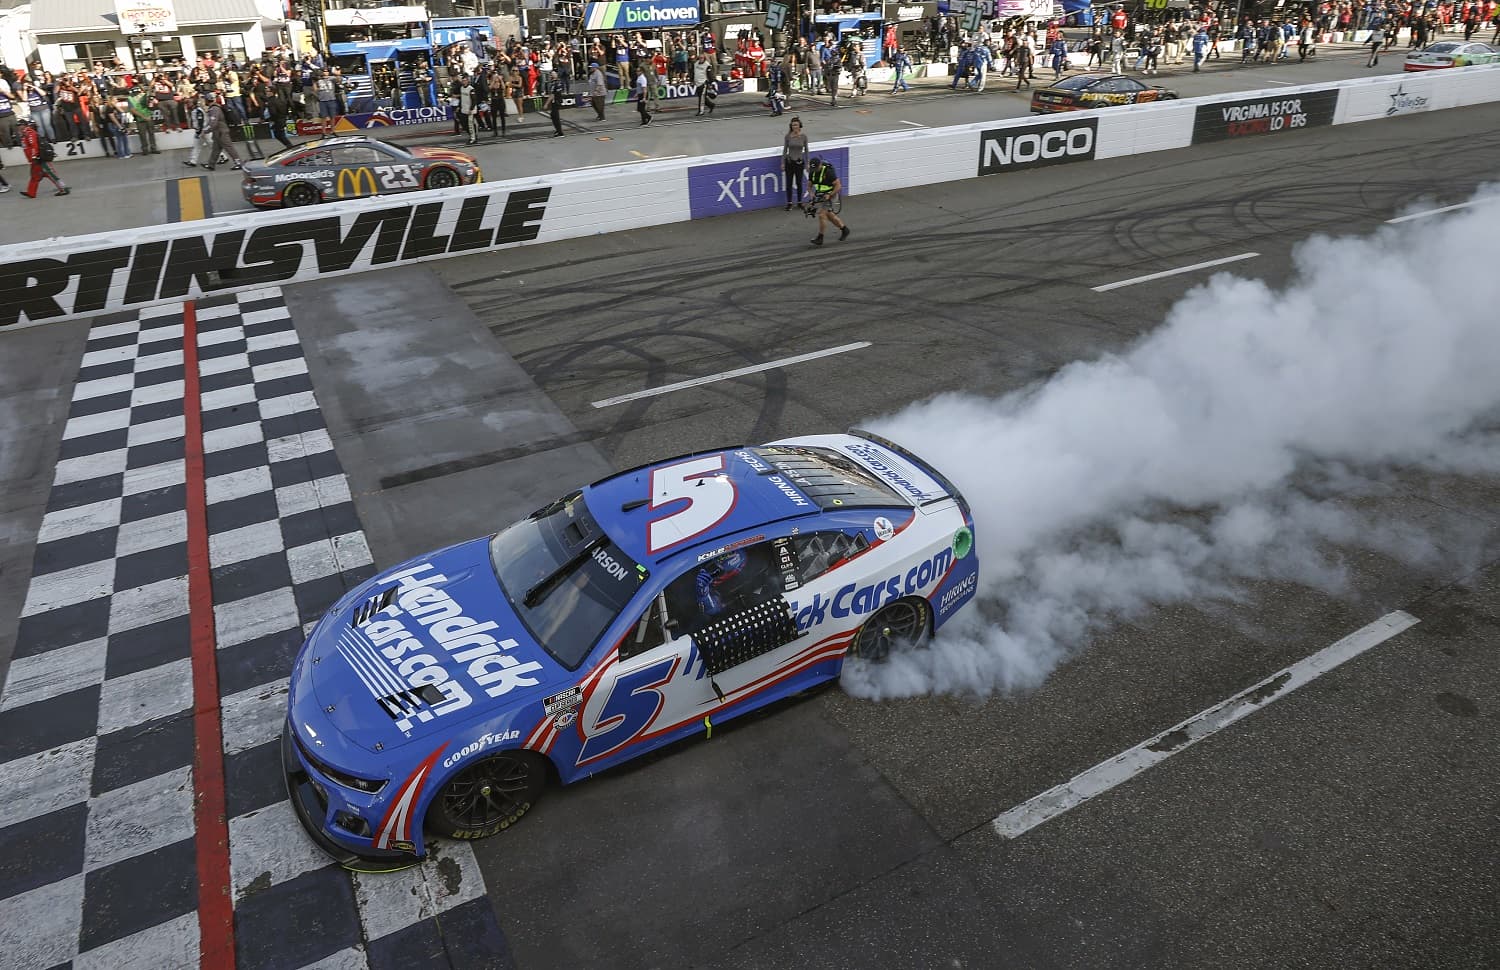 Kyle Larson celebrates with a burnout after winning the NASCAR Cup Series NOCO 400 at Martinsville Speedway on April 16, 2023. | Jared C. Tilton/Getty Images